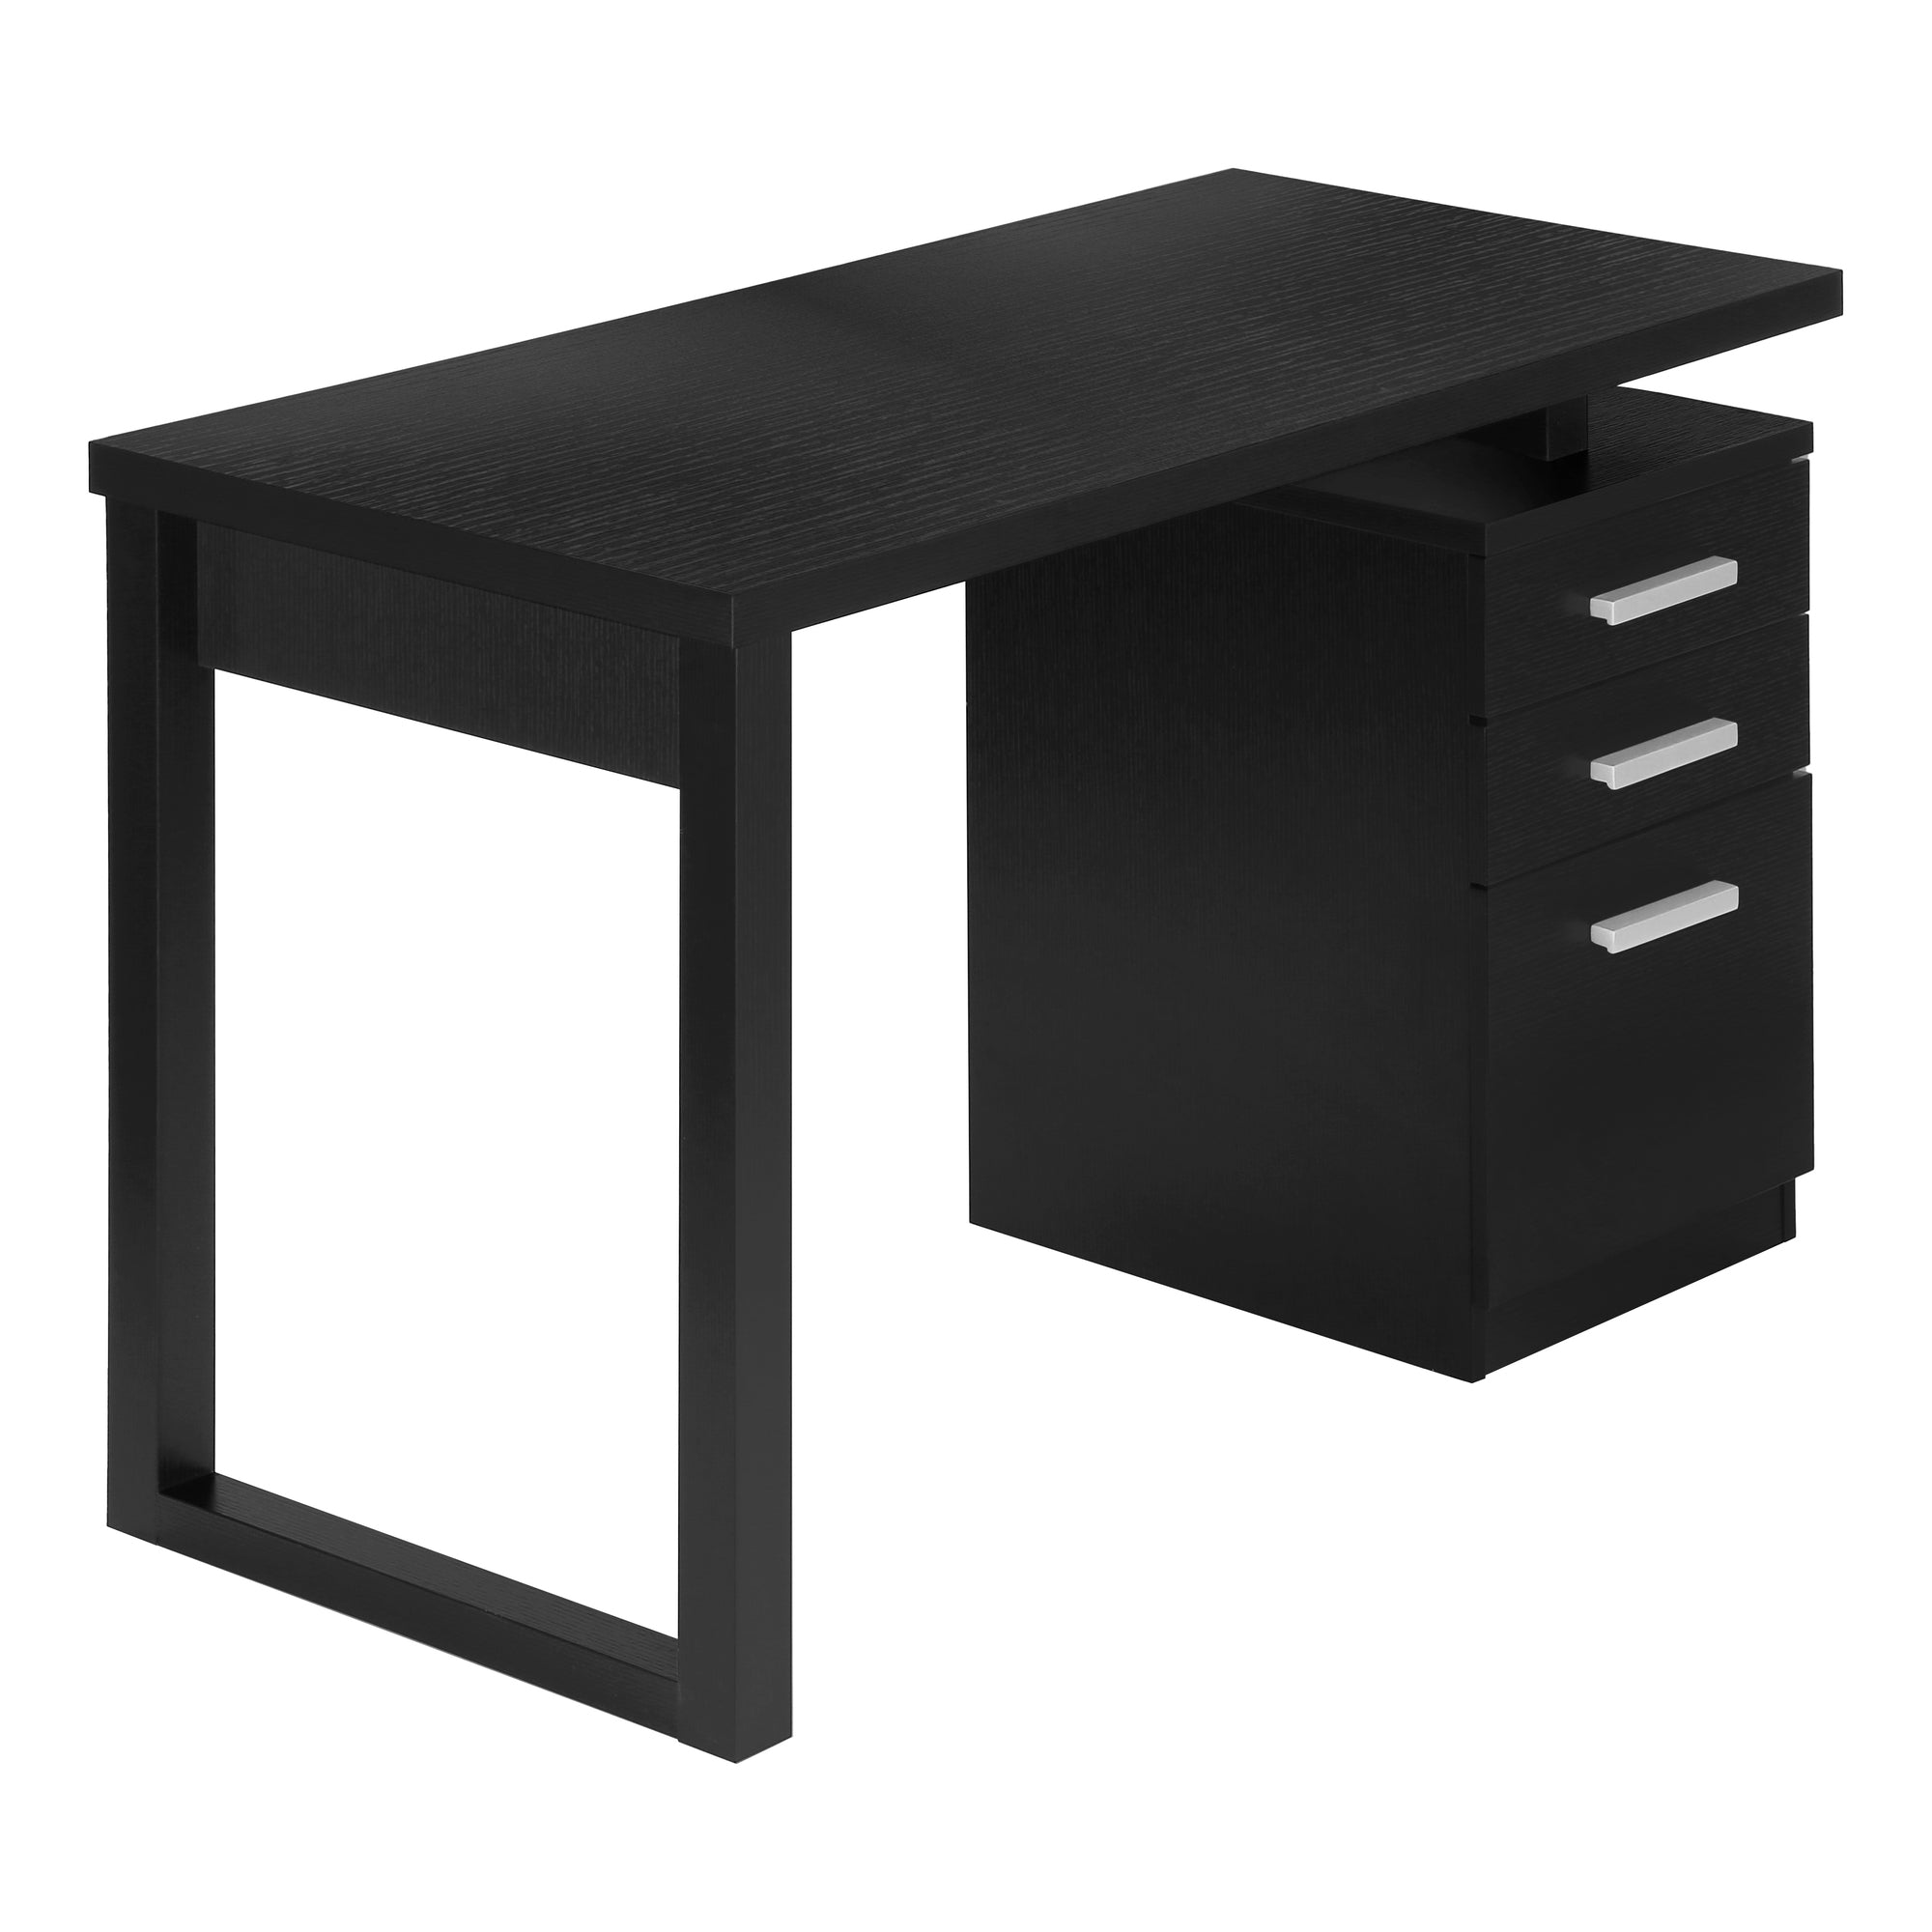 MN-807691    Computer Desk, Home Office, Laptop, Left, Right Set-Up, Storage Drawers, 48"L, Metal, Laminate, Black, Contemporary, Modern